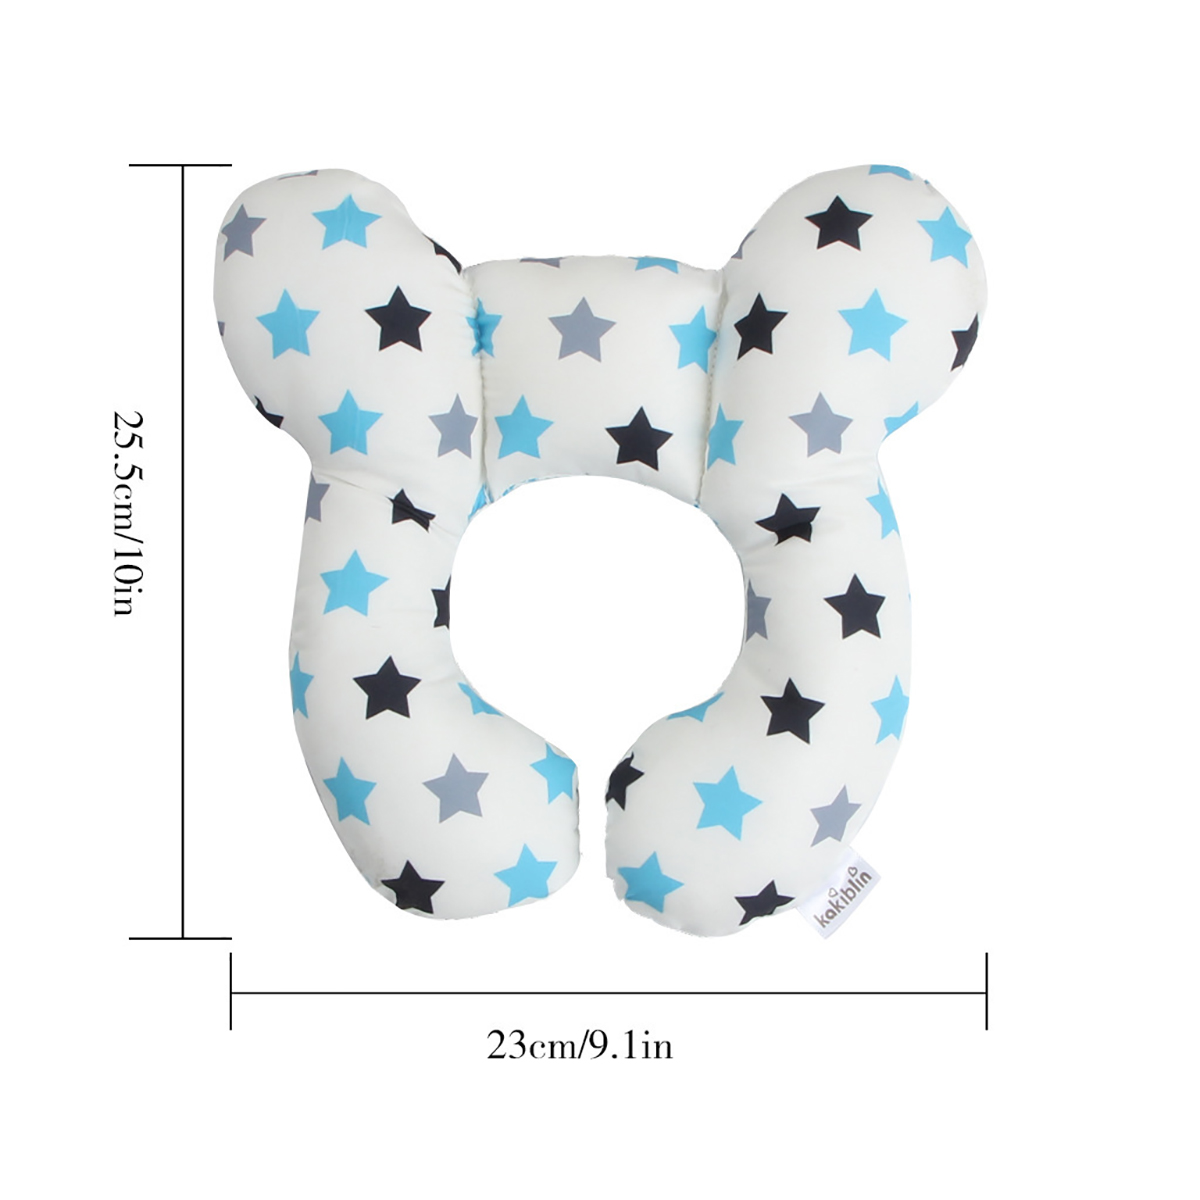 Cotton-U-shaped-Pillow-Baby-Stroller-Car-Seat-Cushion-Pad-Comfortable-Breathable-Kids-Body-Support-P-1761693-2